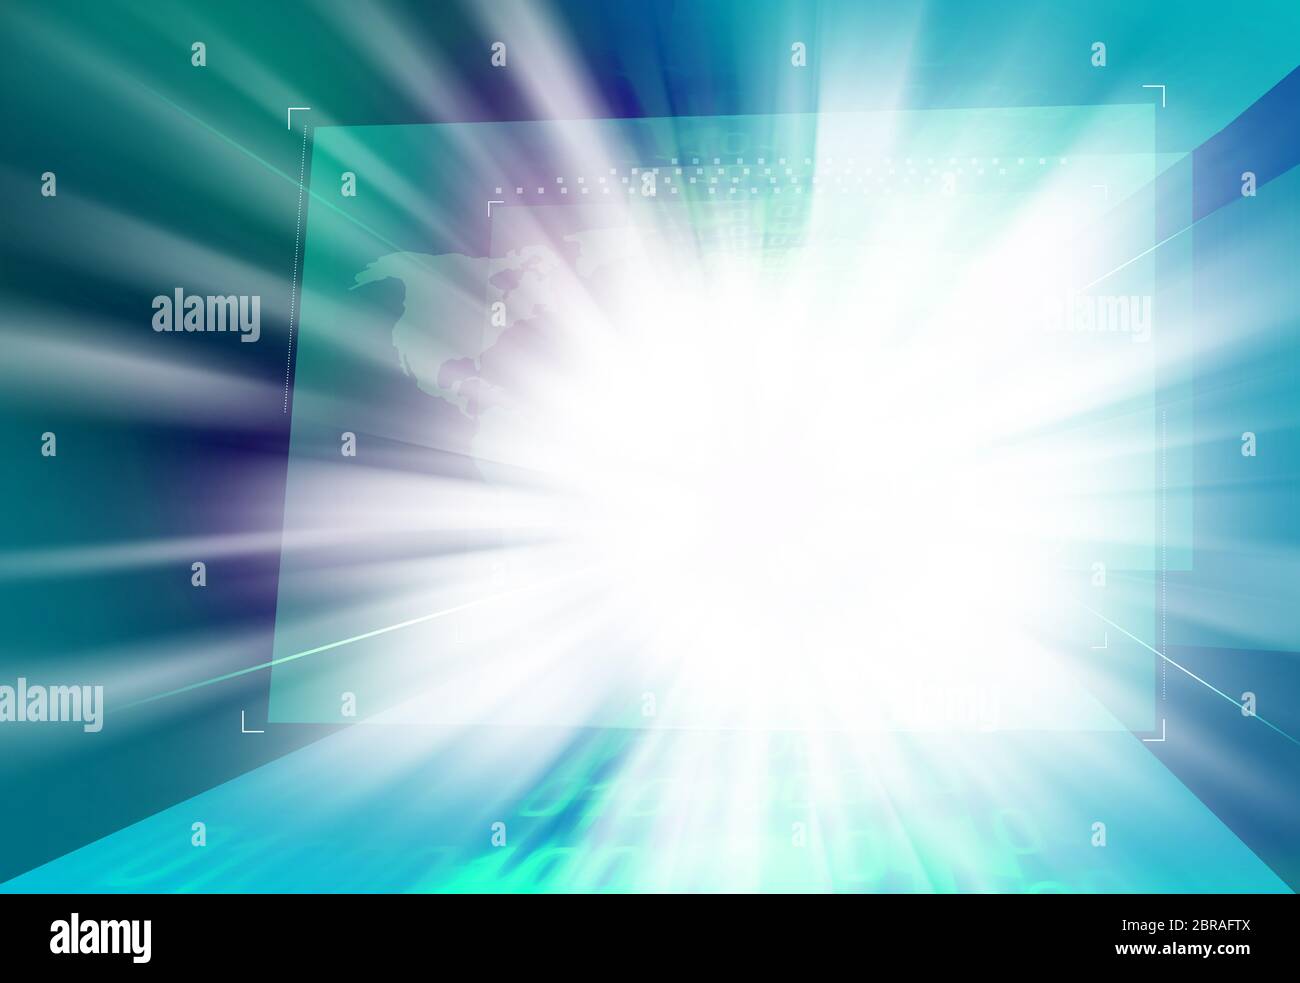 Bursting Light Coming Out From Digital World Screen Stock Photo Alamy